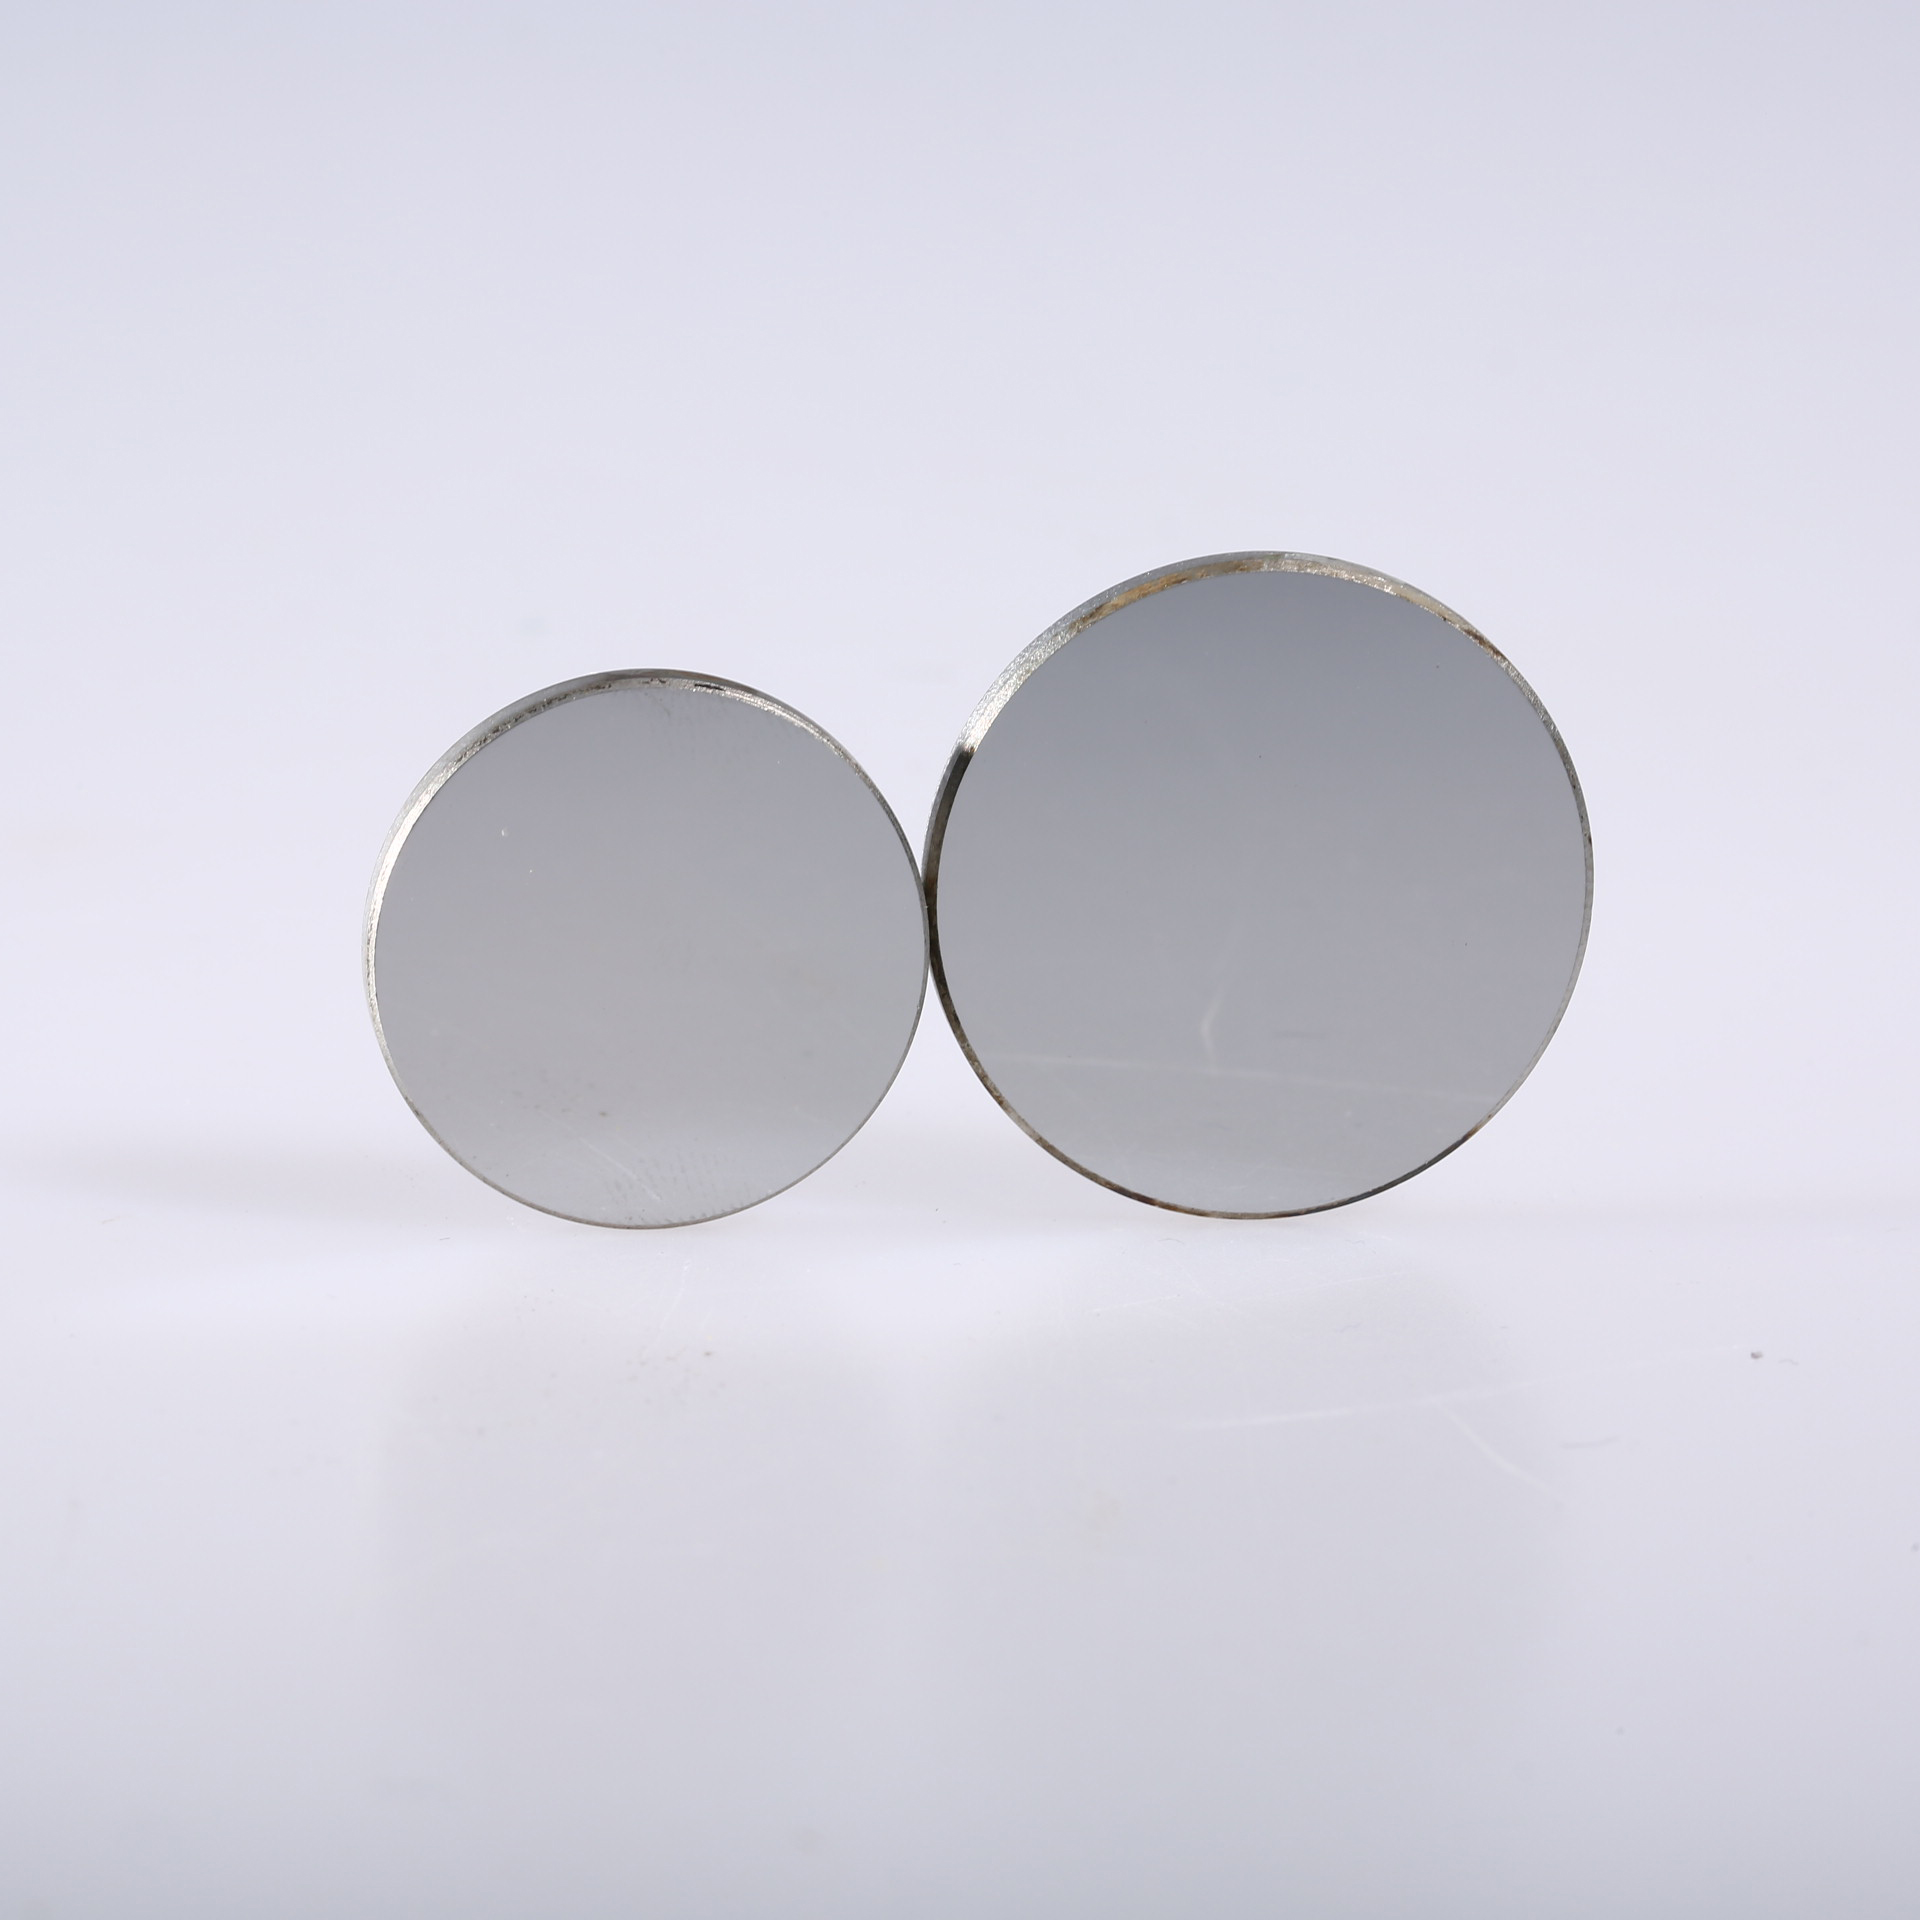 19/20/25/30mm Dia Mo Reflective Mirror Molybdenum Reflector Lens for CO2 Laser Cutting Engraving Machine 15